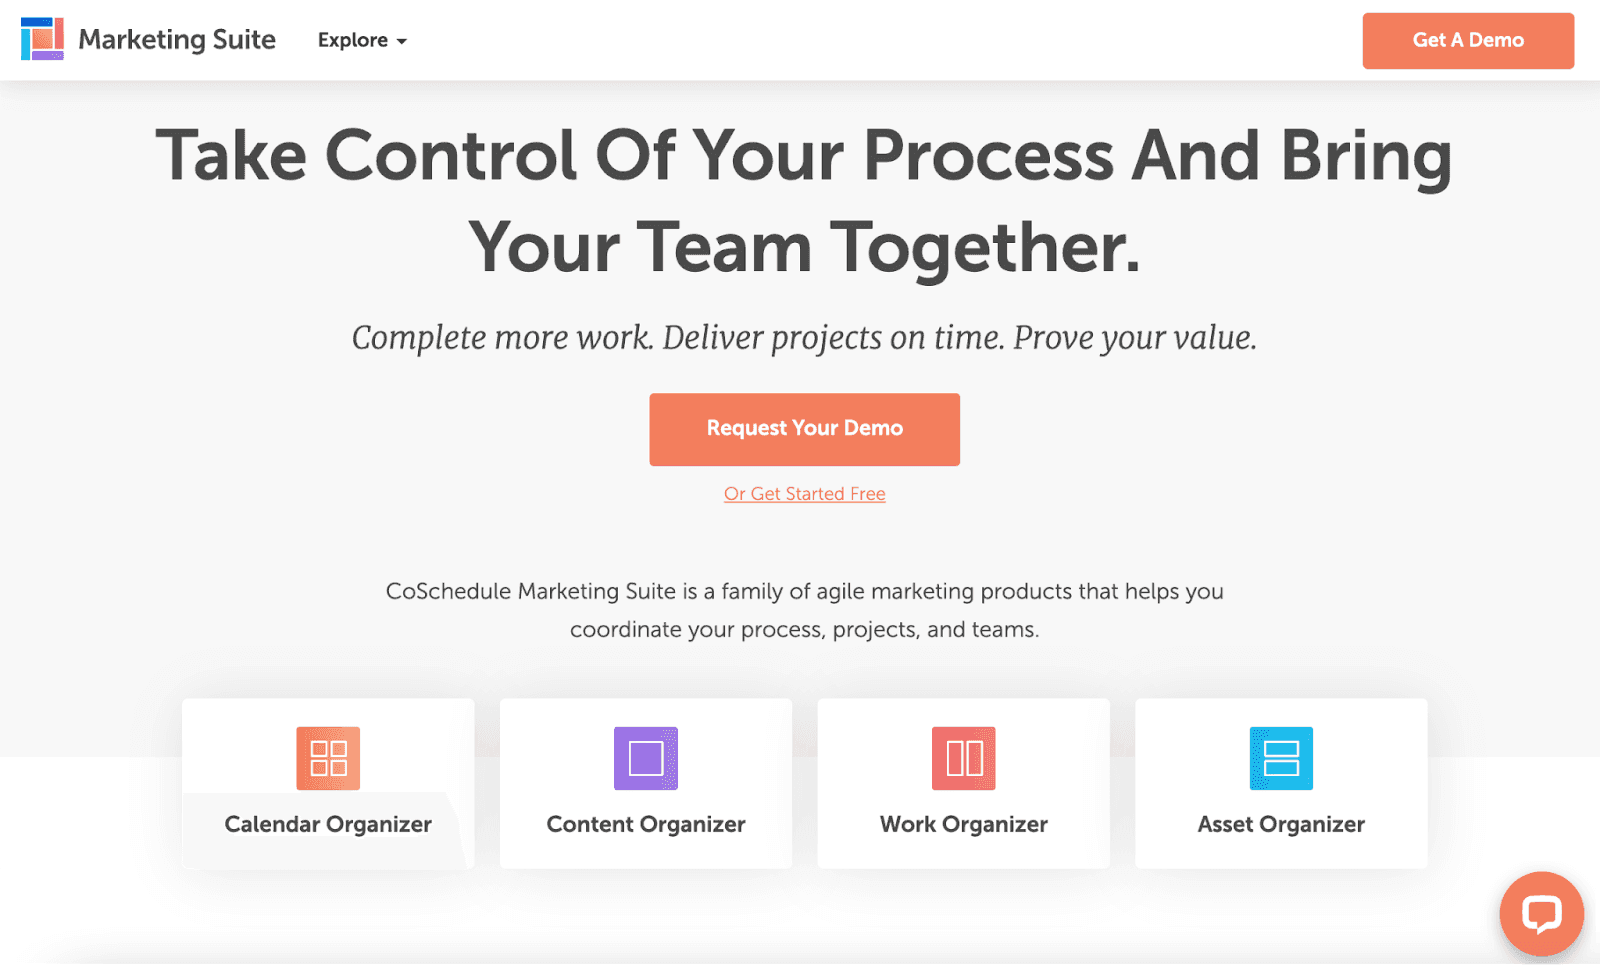 CoSchedule marketing suite allows marketers to stay organized and get more done